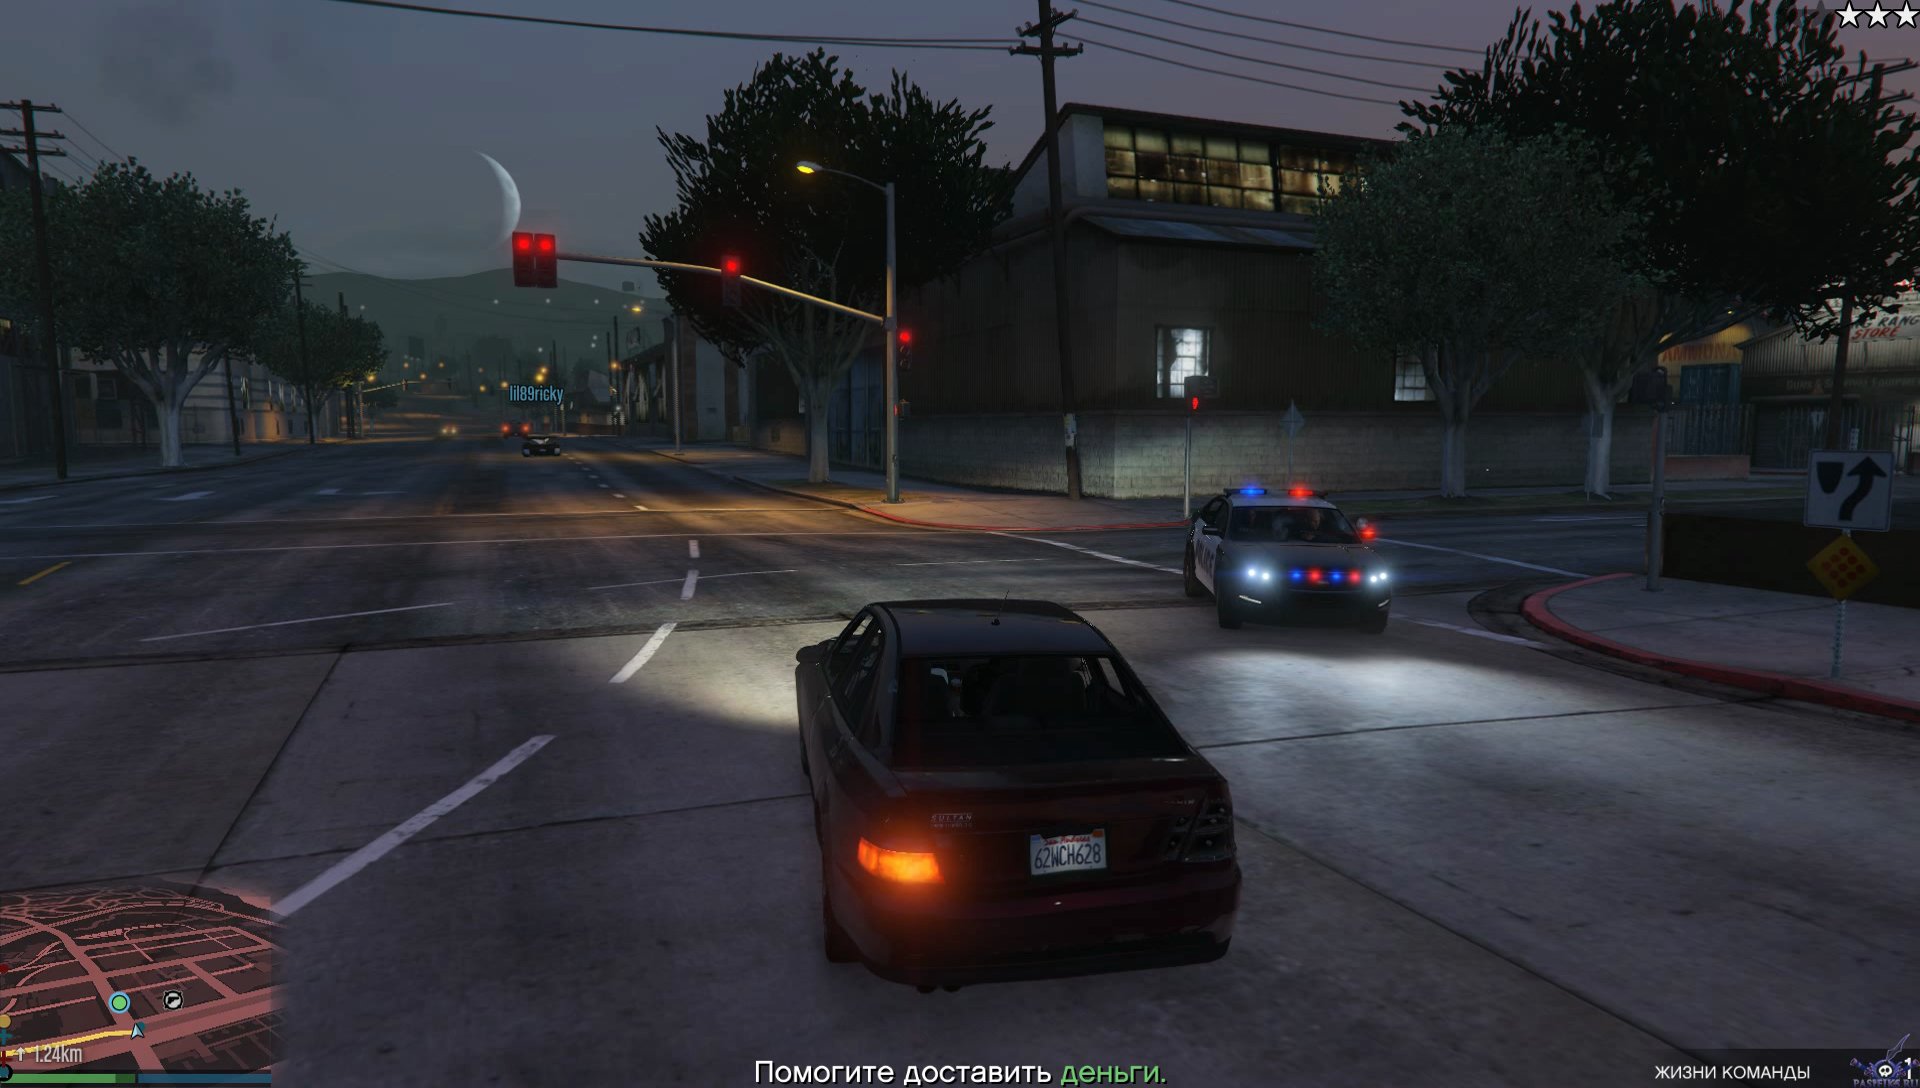 Connection has been closed gta 5 radmir фото 104